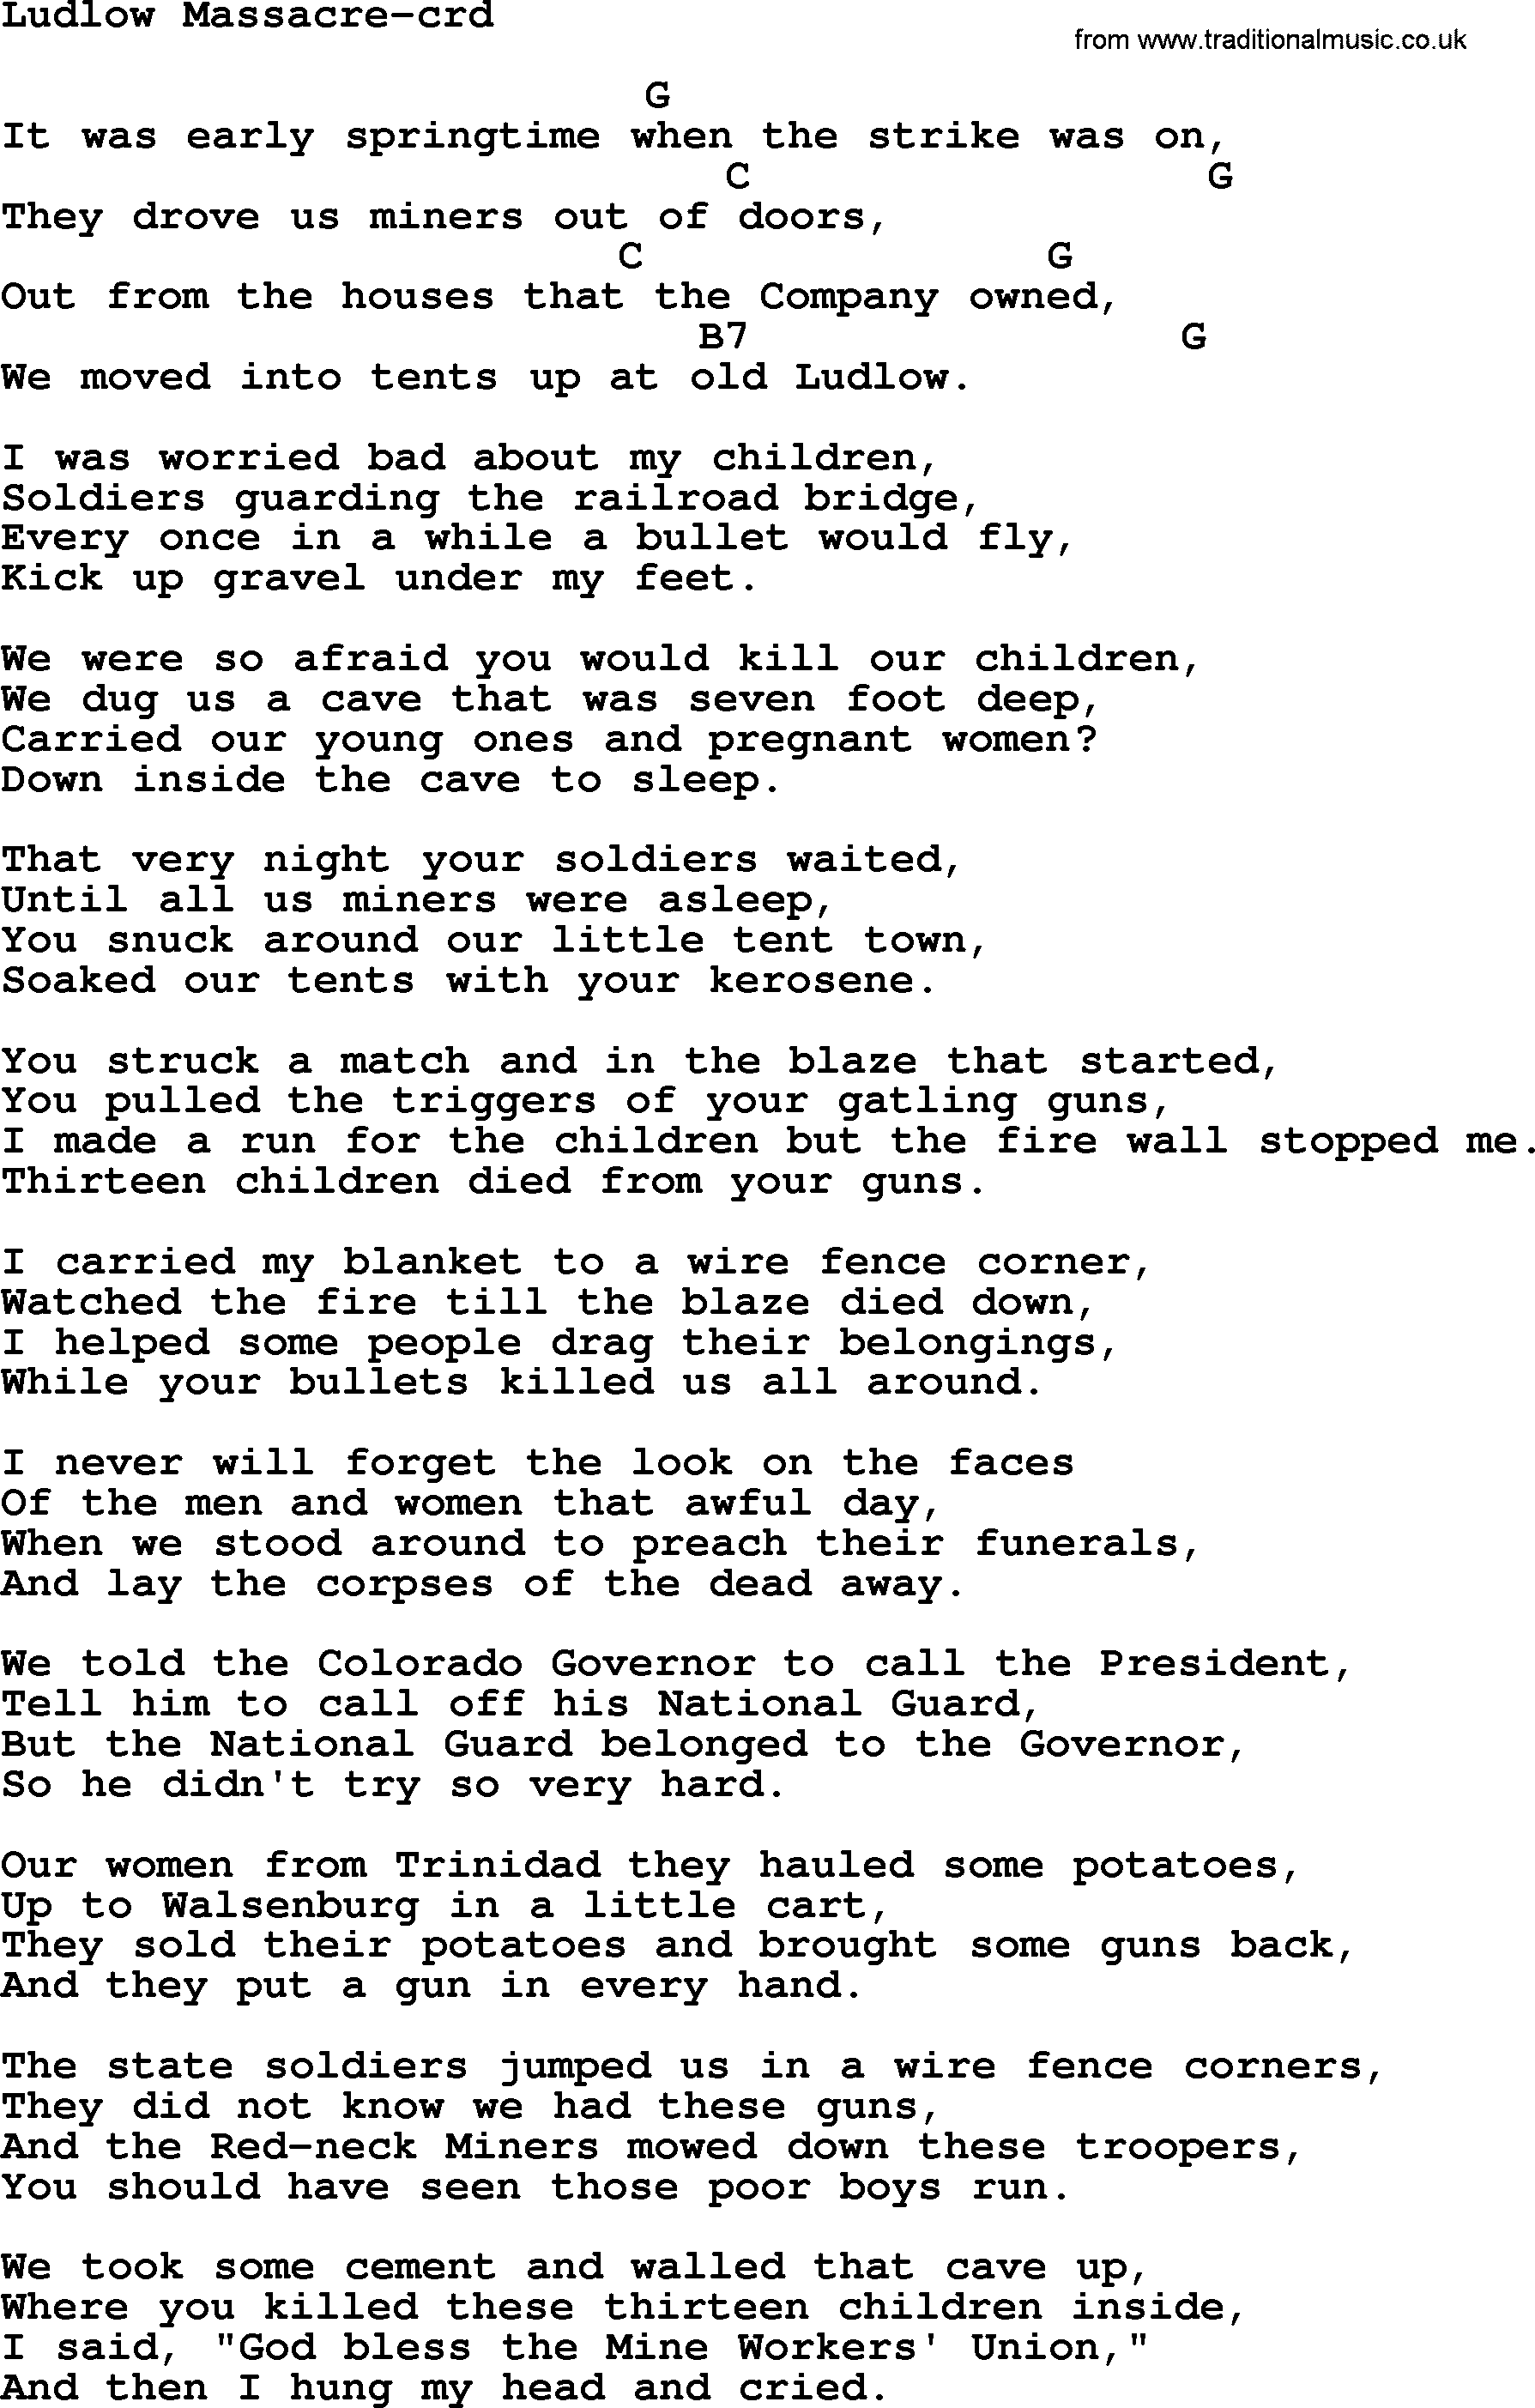 Woody Guthrie song Ludlow Massacre lyrics and chords